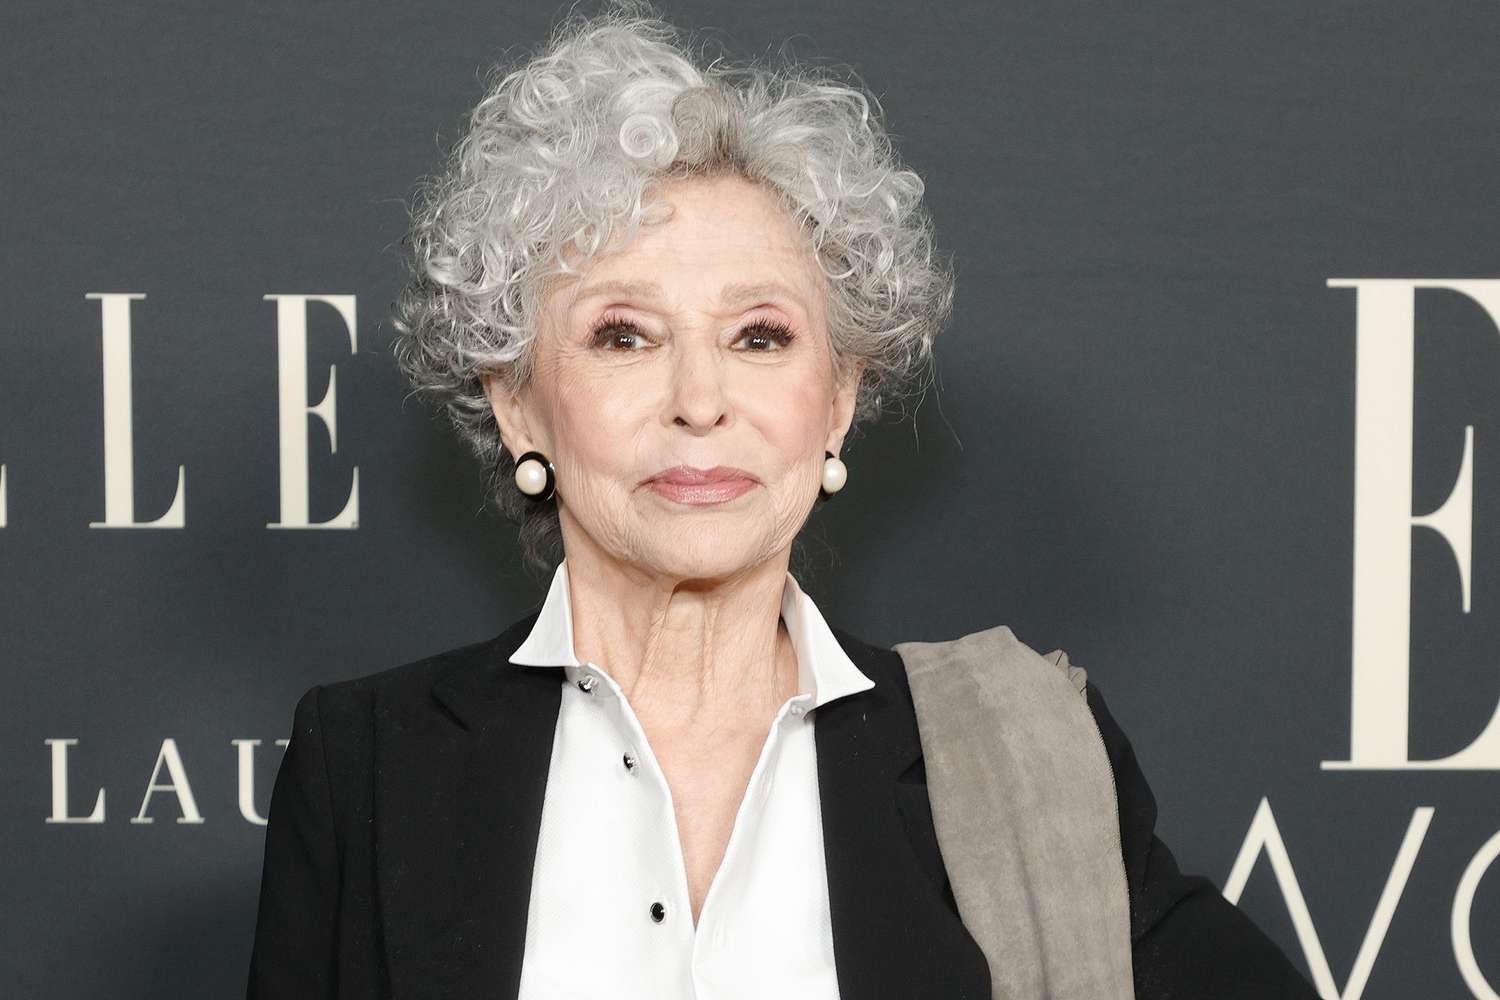 LOS ANGELES, CALIFORNIA - OCTOBER 19: Rita Moreno attends the 27th Annual ELLE Women in Hollywood Celebration at Dolby Terrace at the Academy Museum of Motion Pictures on October 19, 2021 in Los Angeles, California. (Photo by Amy Sussman/Getty Images)